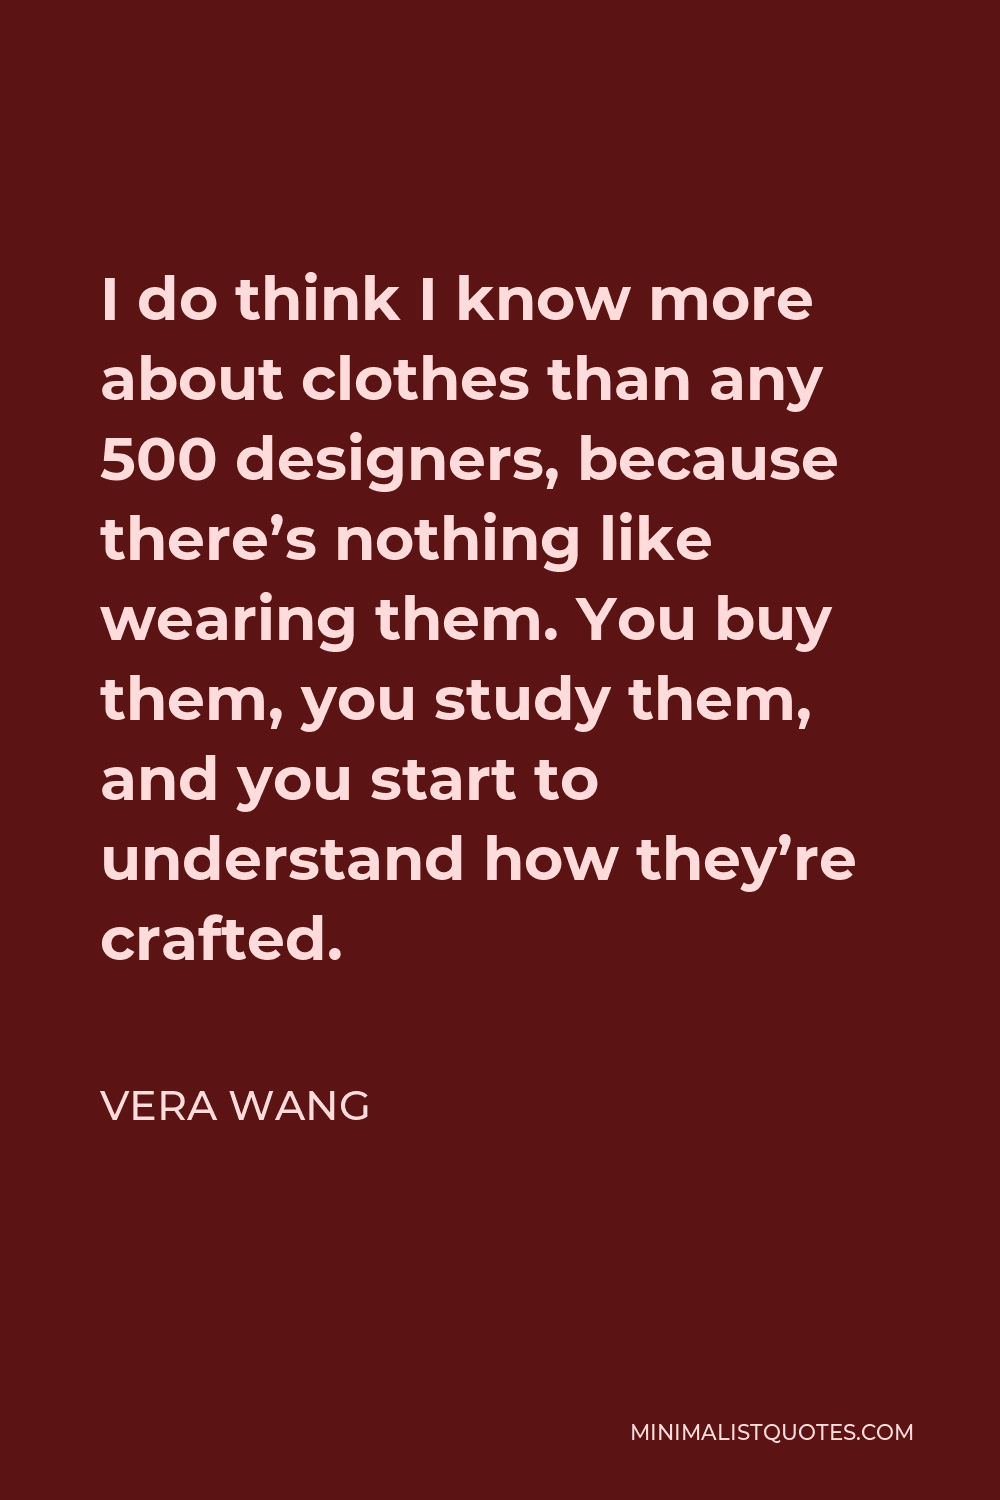 Vera Wang Quote - I do think I know more about clothes than any 500 designers, because there’s nothing like wearing them. You buy them, you study them, and you start to understand how they’re crafted.